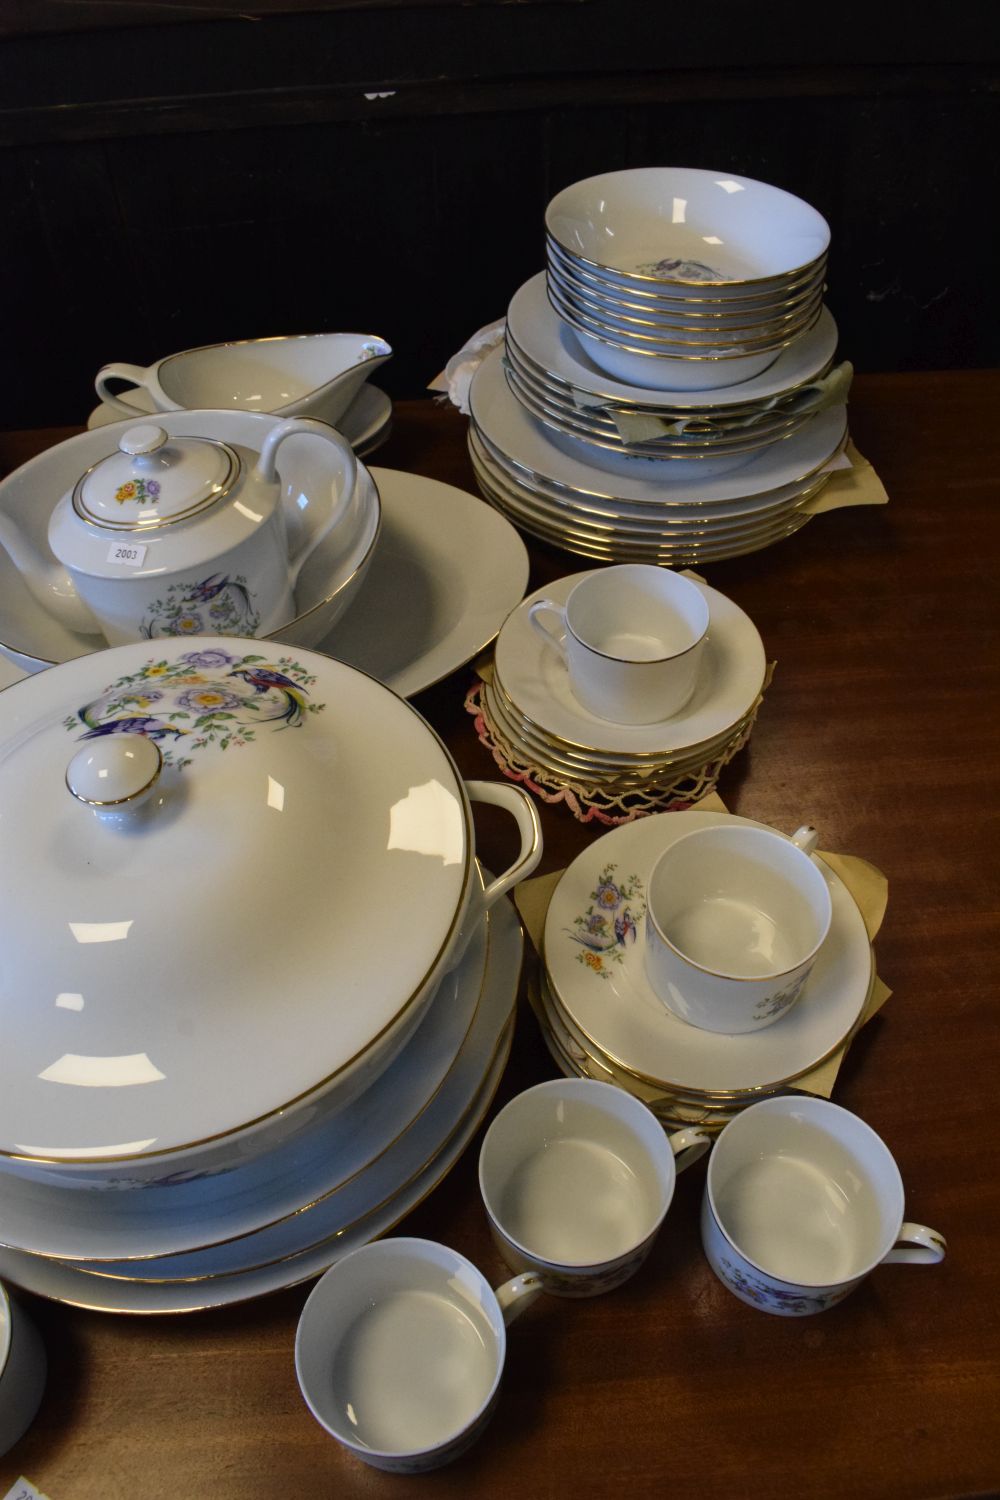 Extensive Limoges porcelain dinner and coffee service in the Royal Limoges pattern - Image 2 of 11